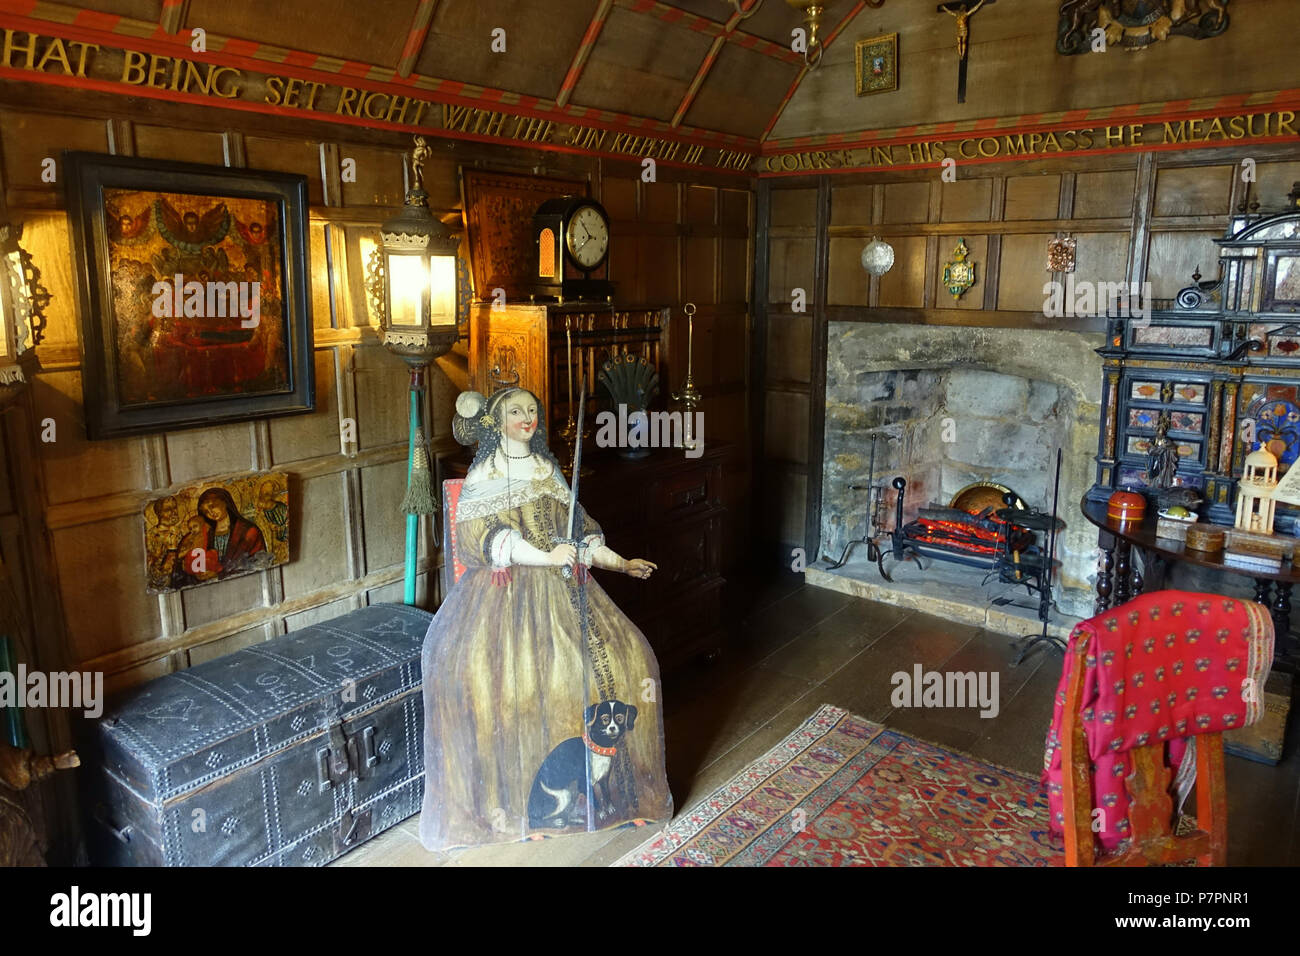 English: Interior view of Snowshill Manor - Gloucestershire, England. All items in this photograph are old enough to be in the . 23 May 2016, 08:51:53 204 Interior view - Snowshill Manor - Gloucestershire, England - DSC09604 Stock Photo